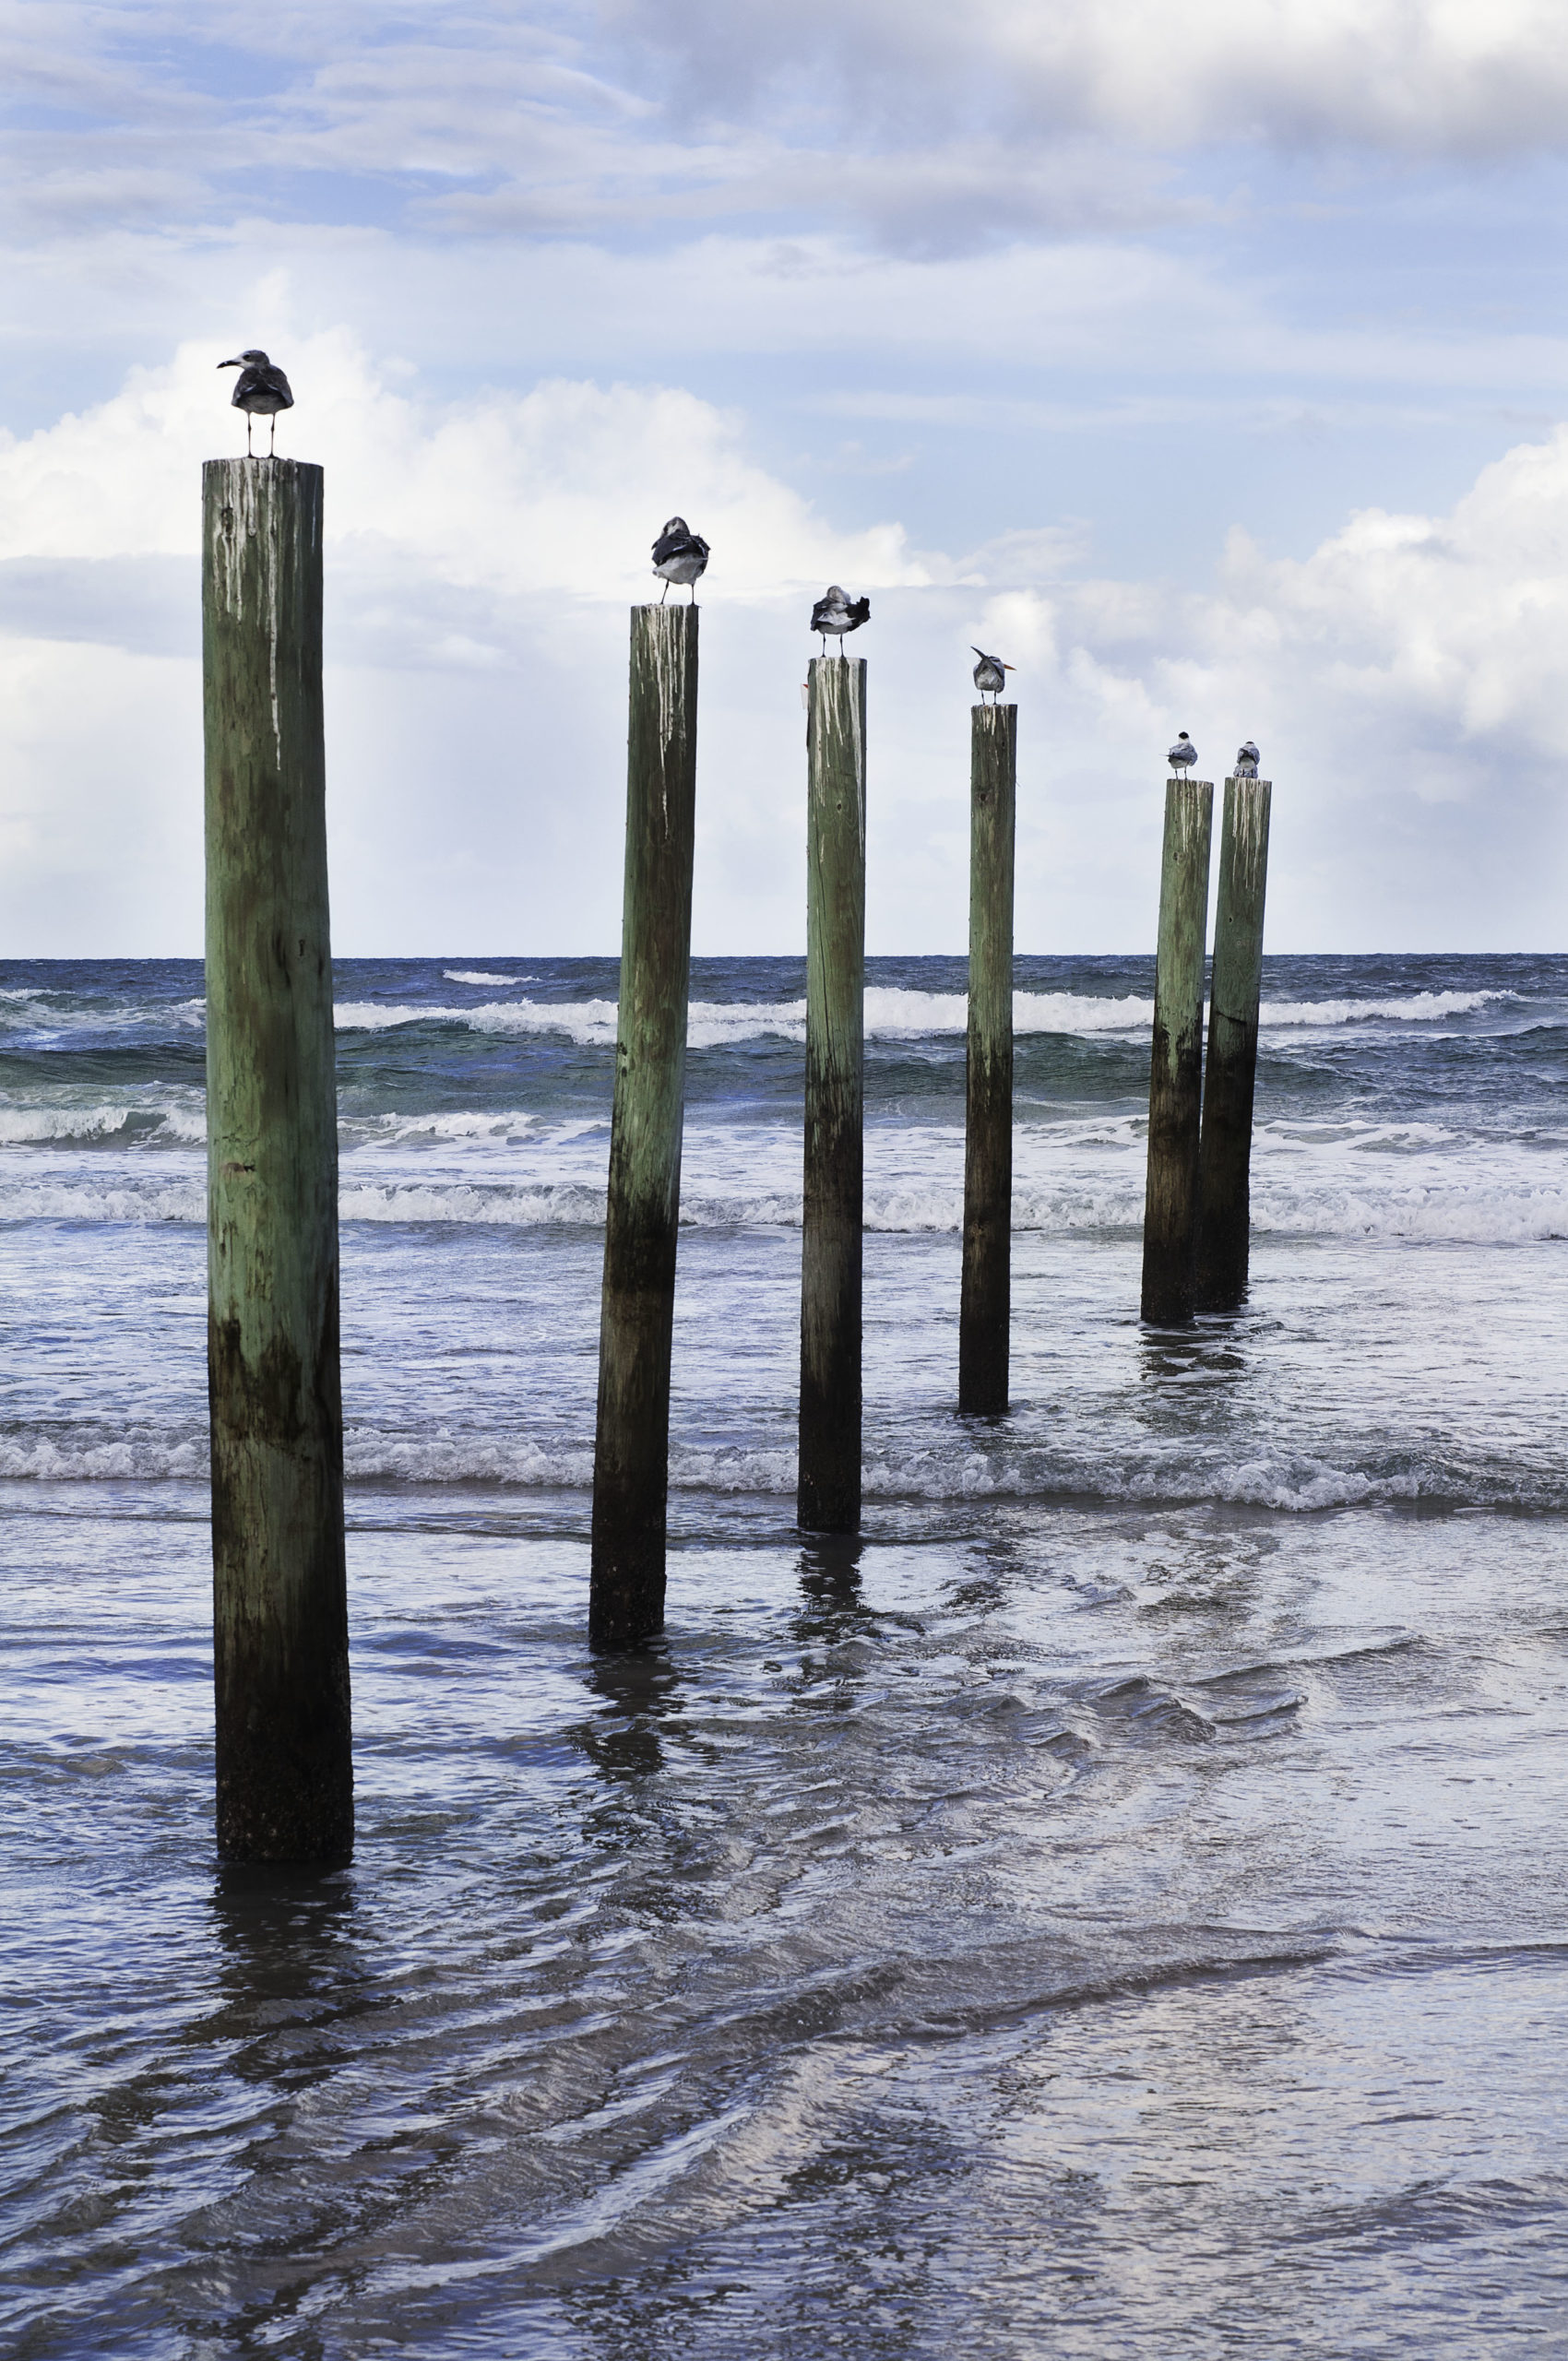 Tall image of Several birds standing on posts in shallow water